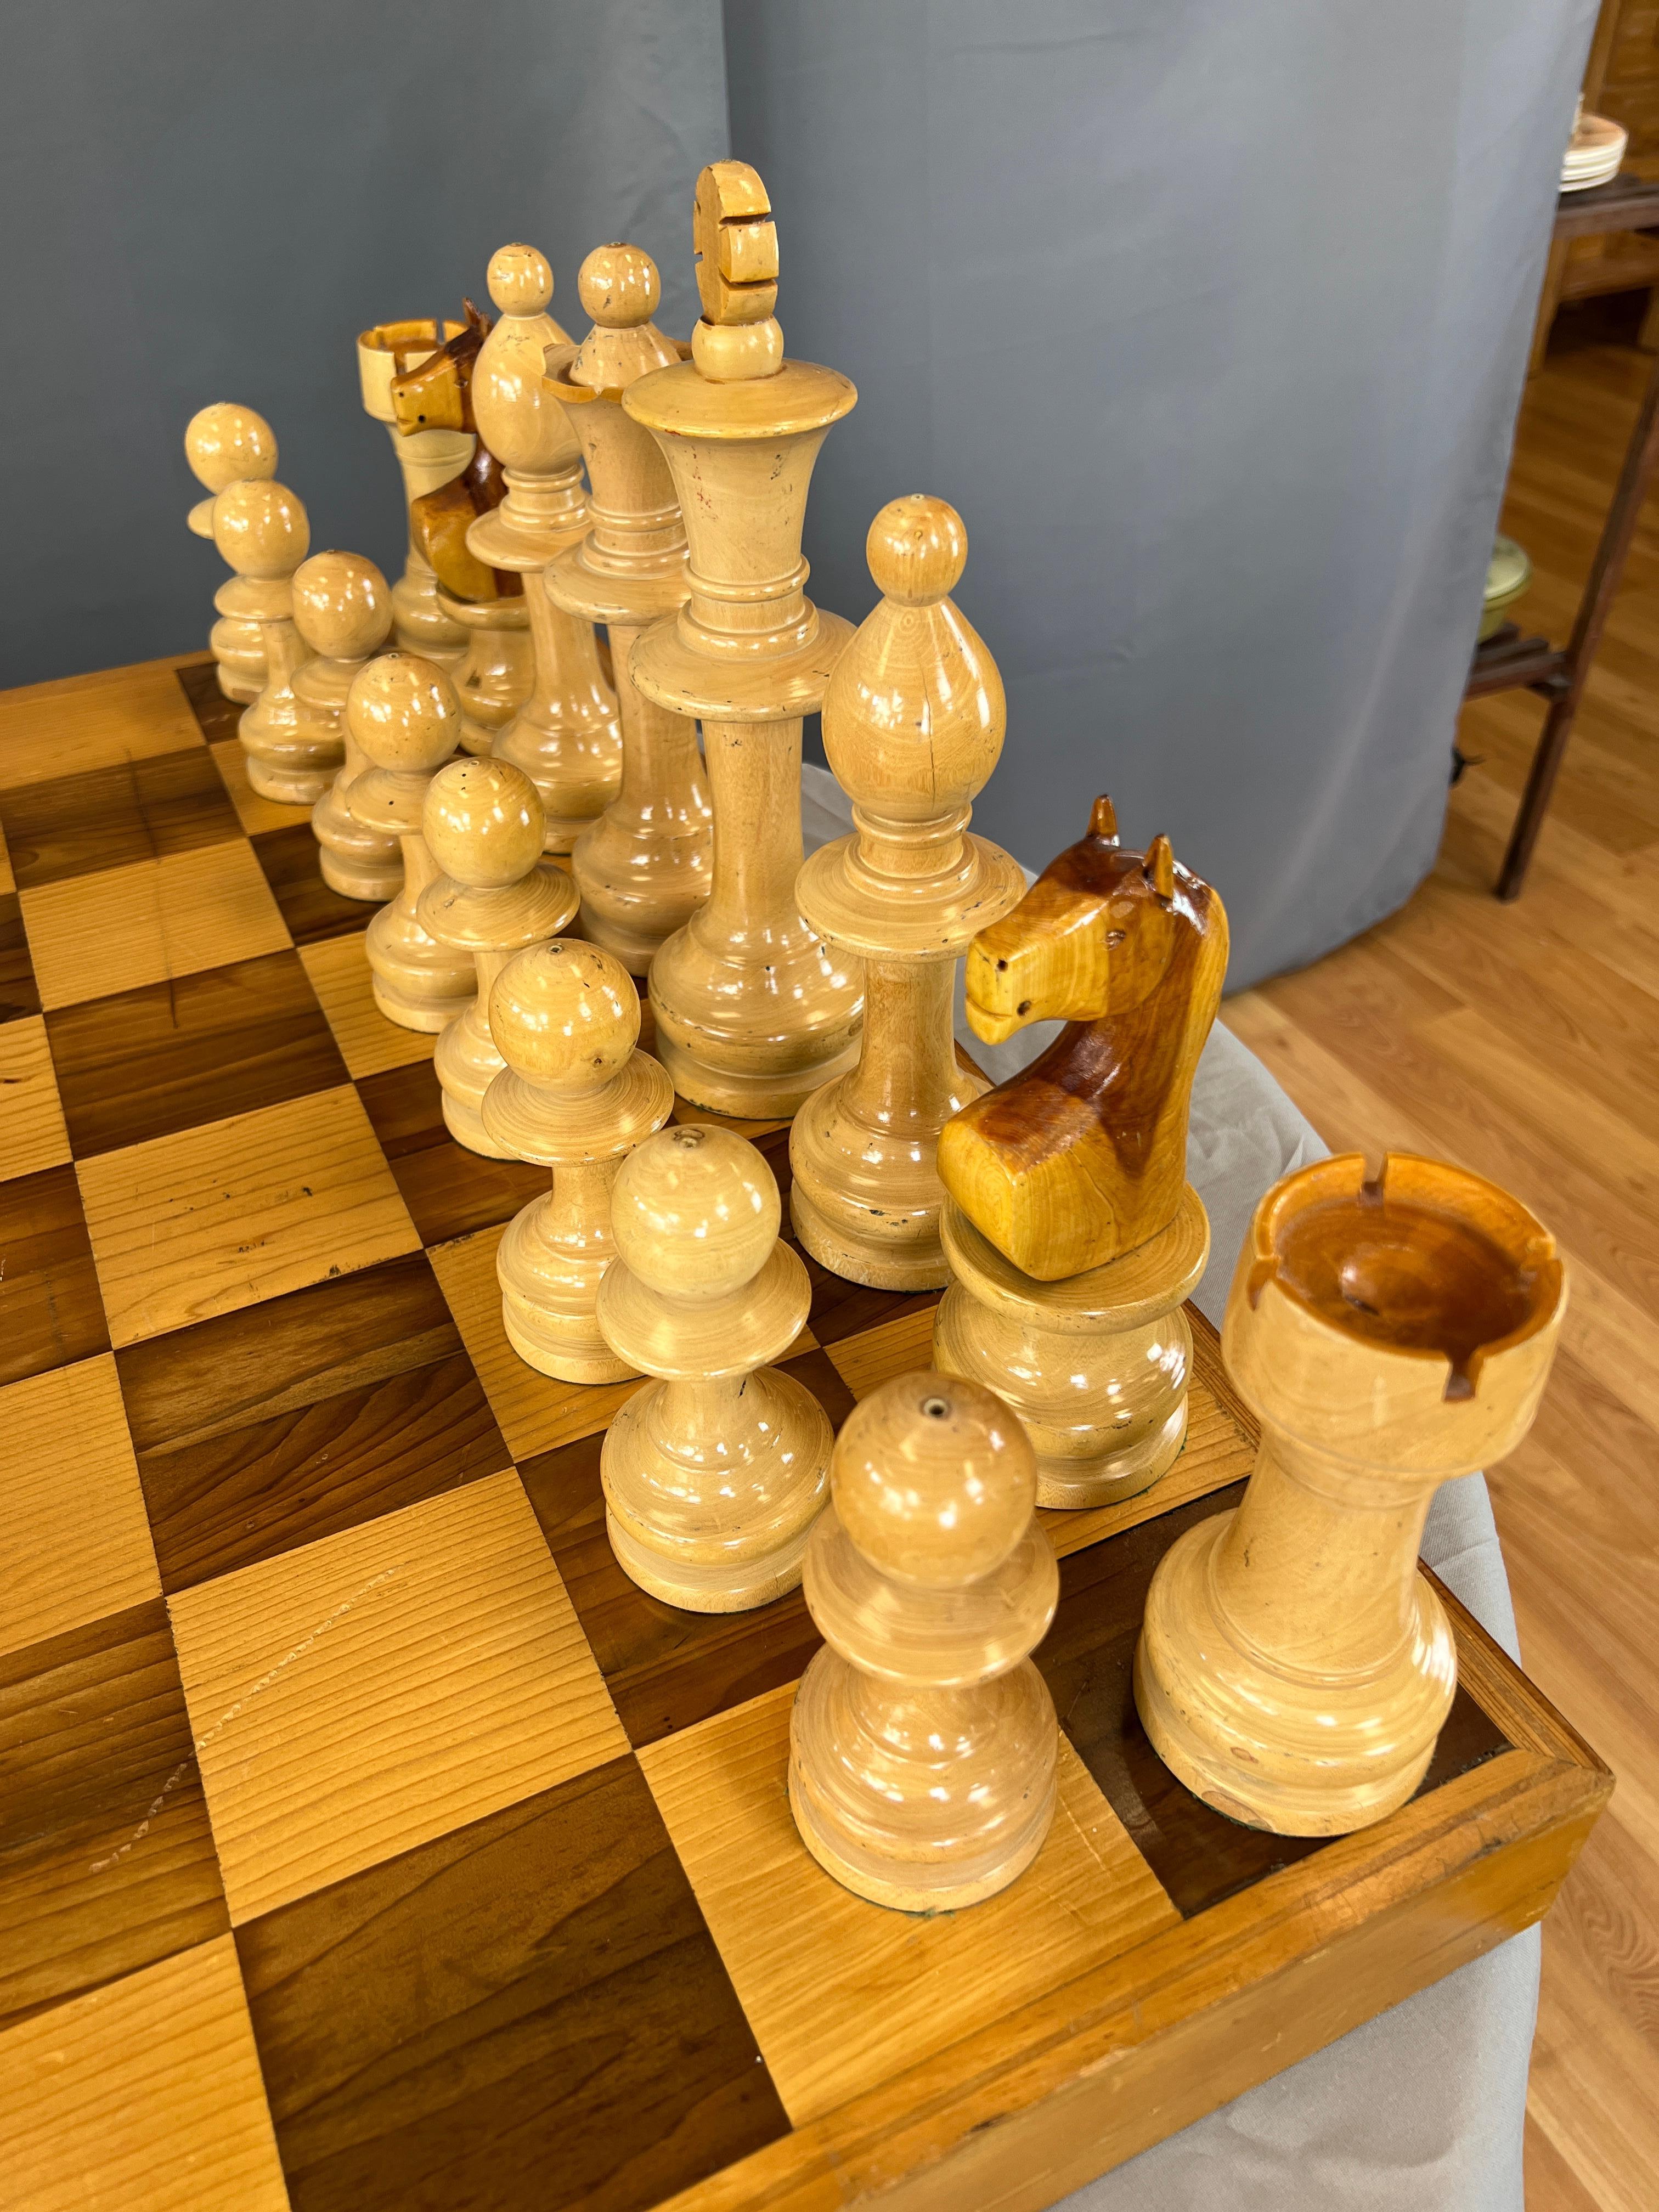 Other Unique & Monumental Hand Crafted Wooden Chess Set 33pc